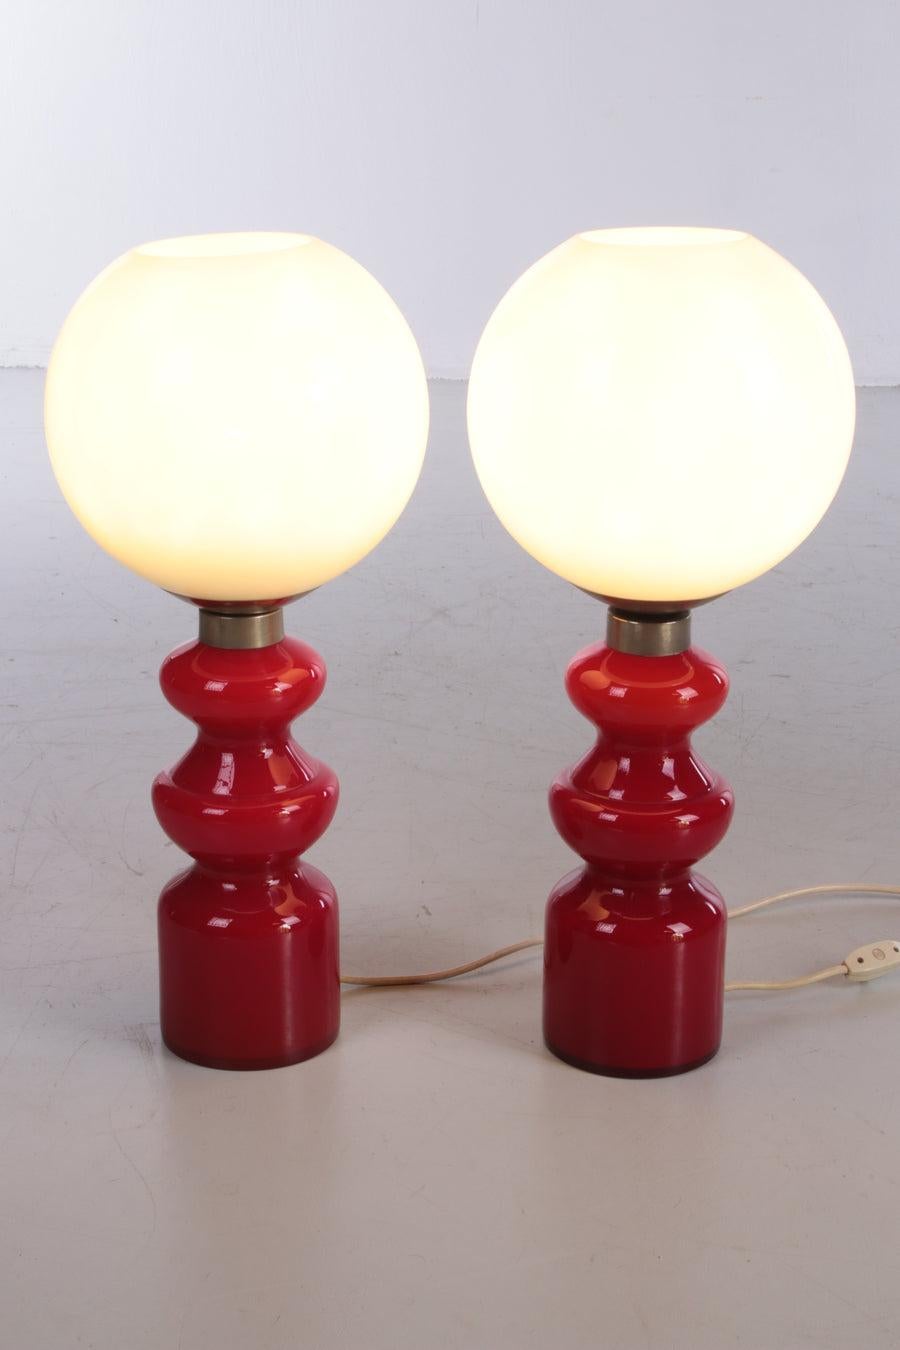 Pair of Retro Red and White Table Lamps Set, 1970s

Additional information:
Dimensions: 25 W x 55 H cm
Country of origin: Germany
Condition: Good